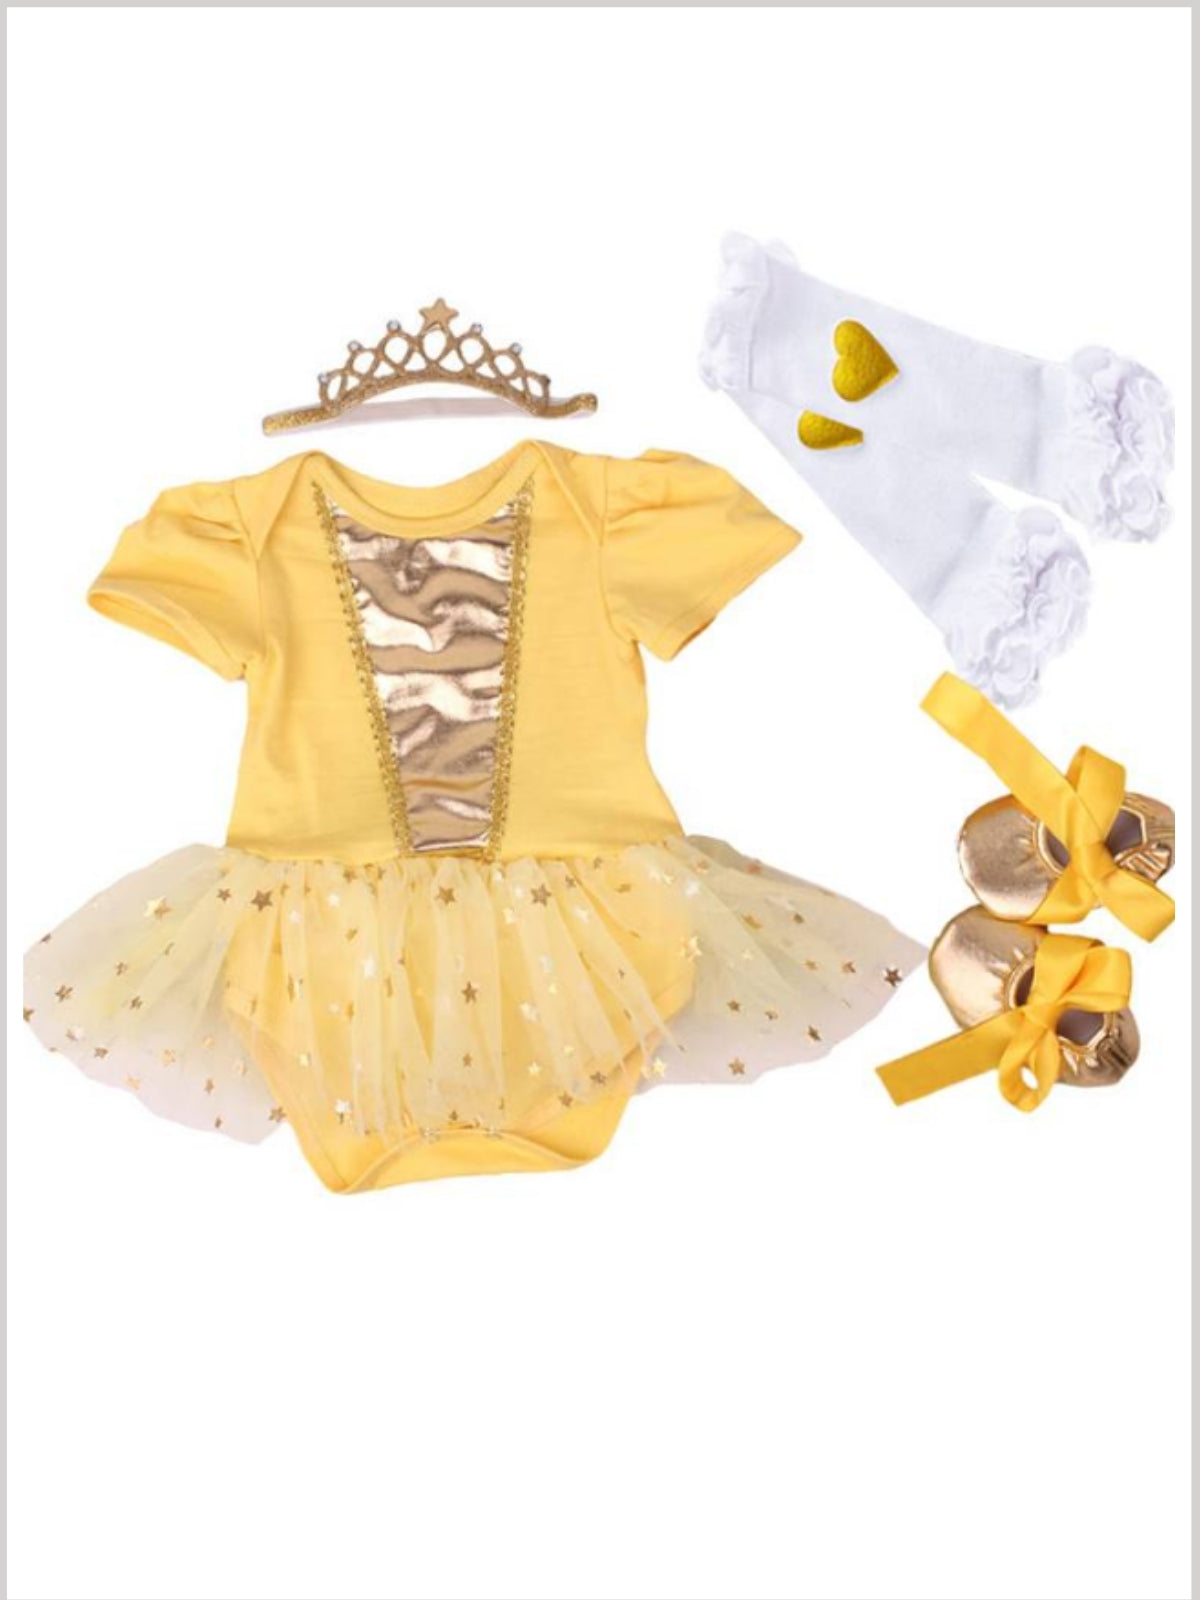 Baby Little Princess Onesie with Tiara Headband, Socks and Matching Shoes Set